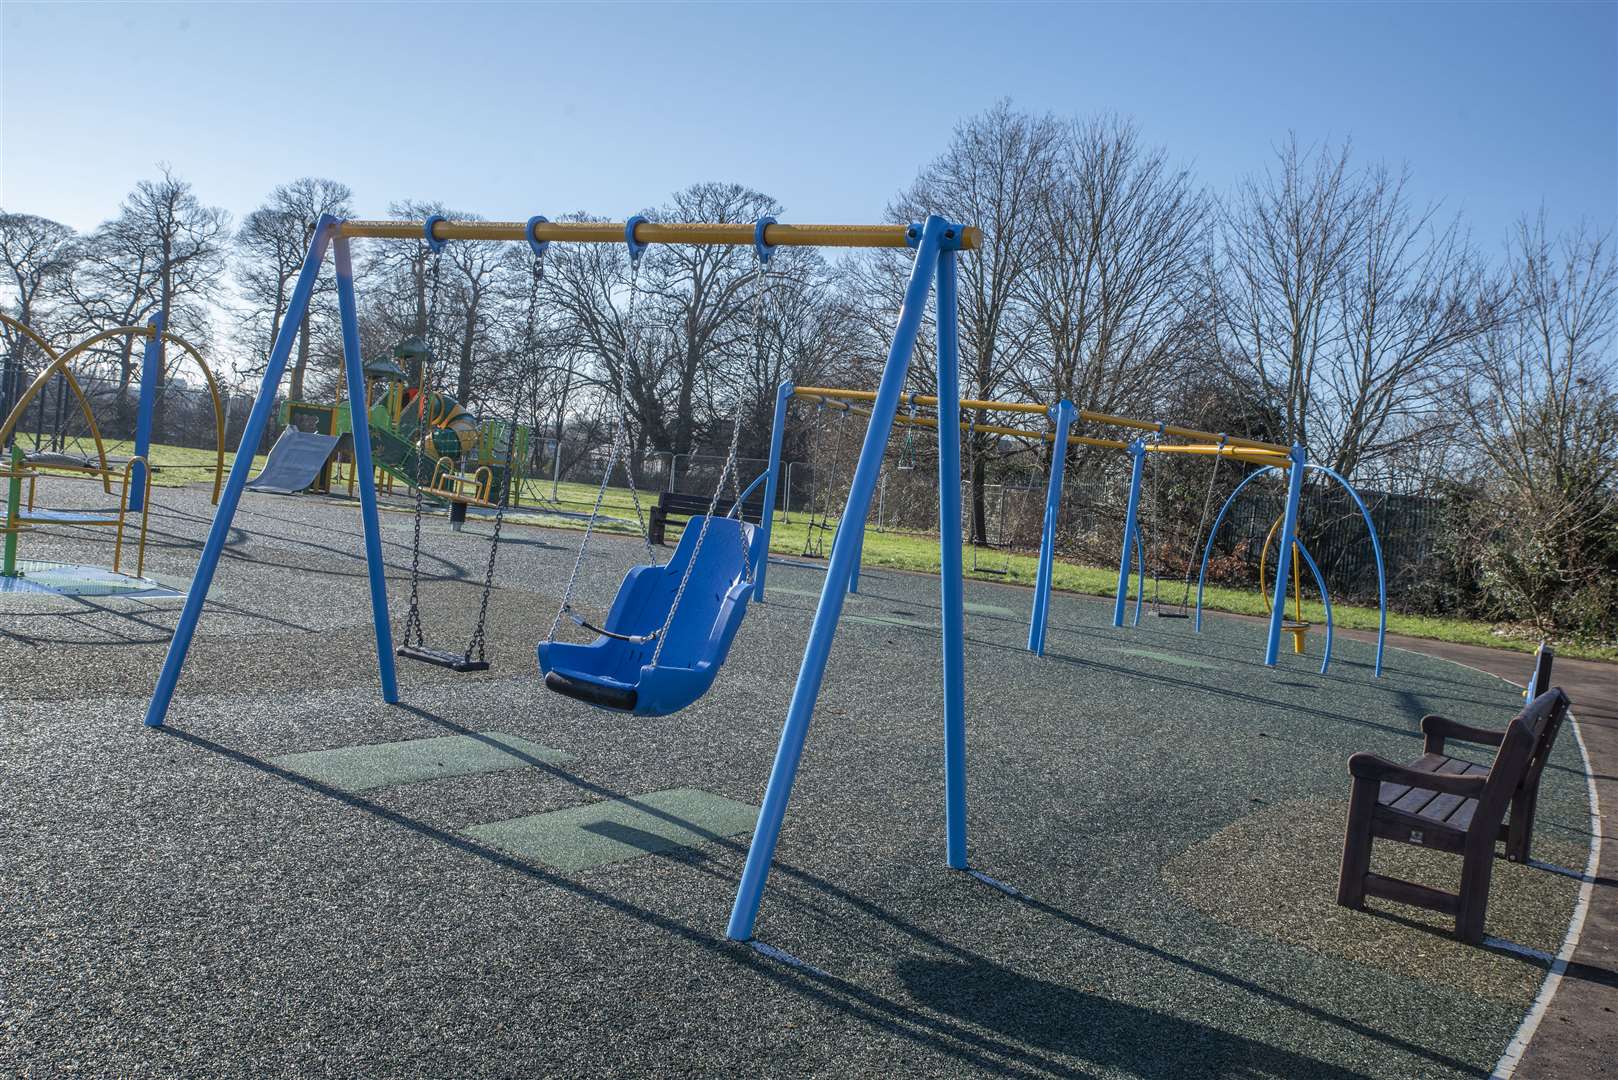 A range of different swings feature at the park